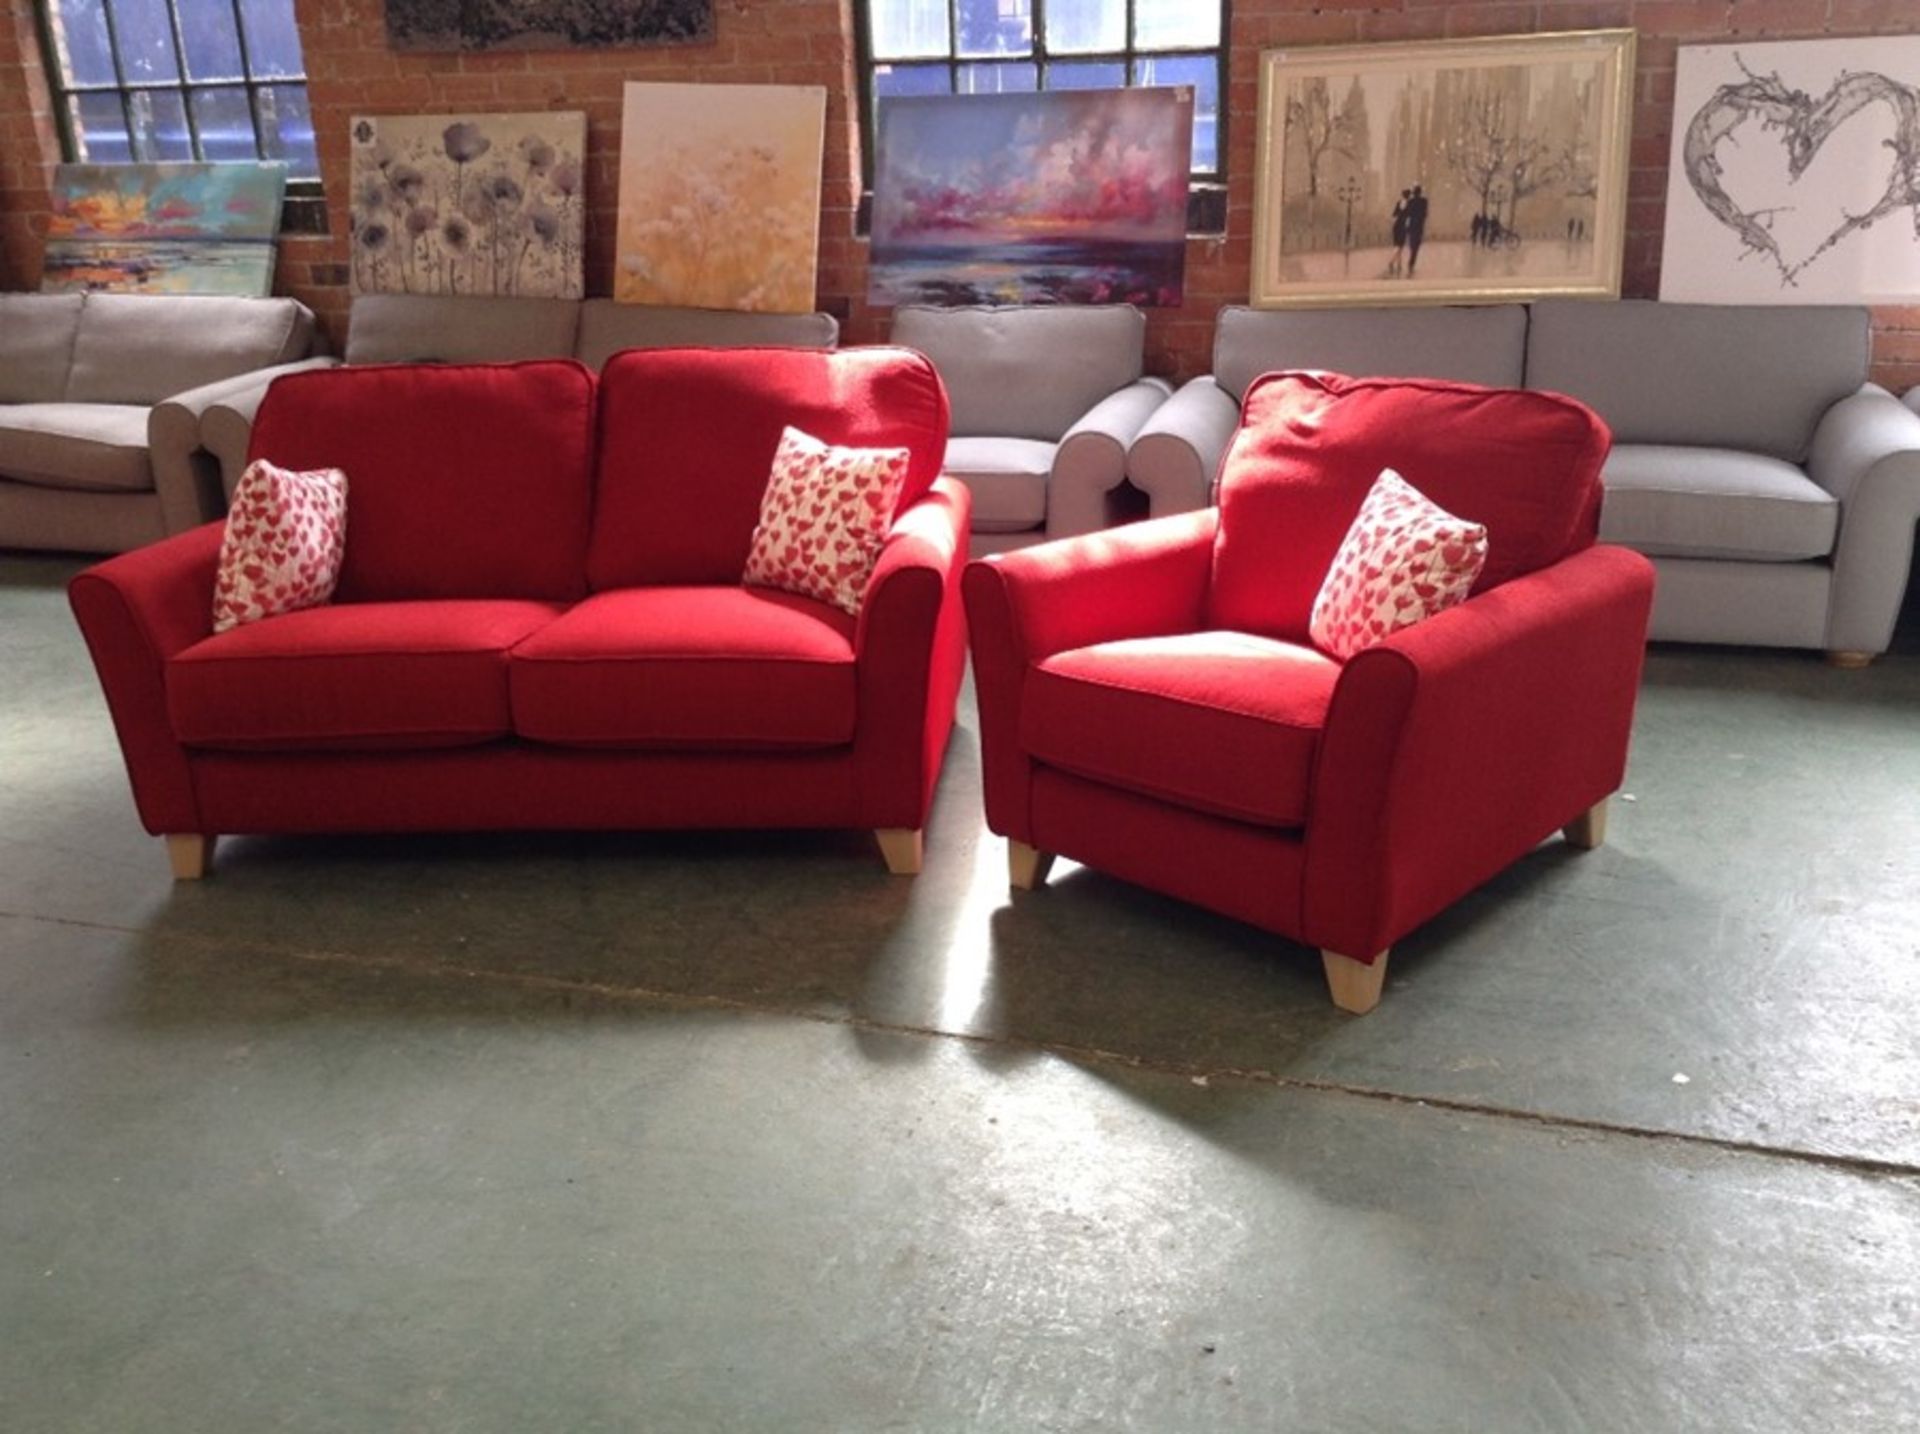 MELBOURNE CORSICA RED 2 SEATER SMALL AND CHAIR (SF